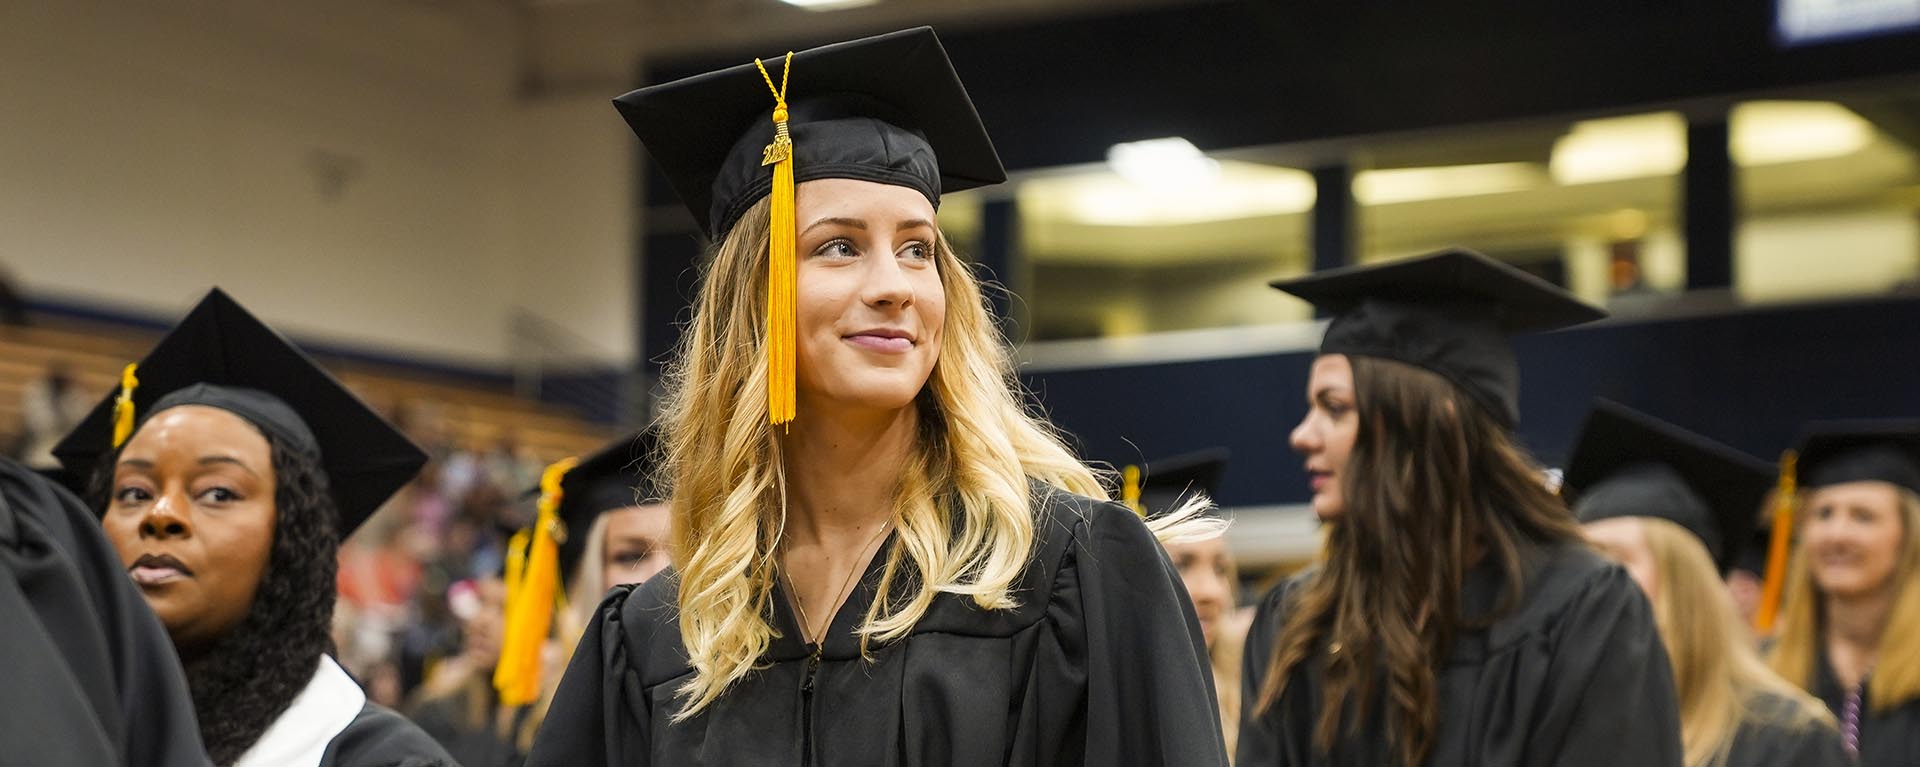 student smiles during commencement ceremony